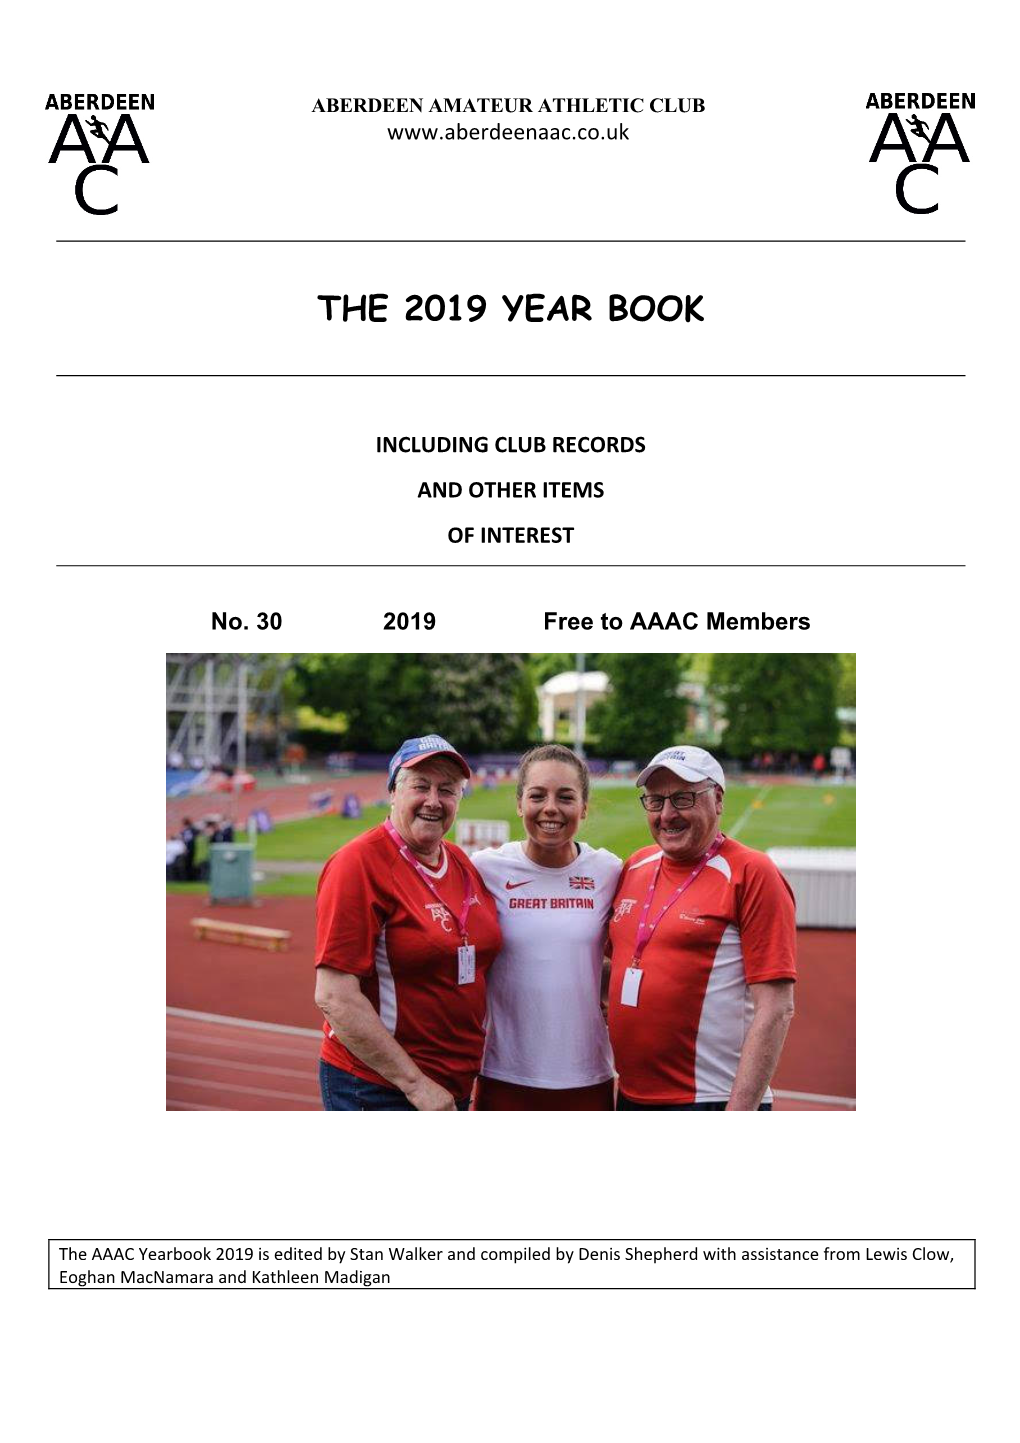 The 2019 Year Book